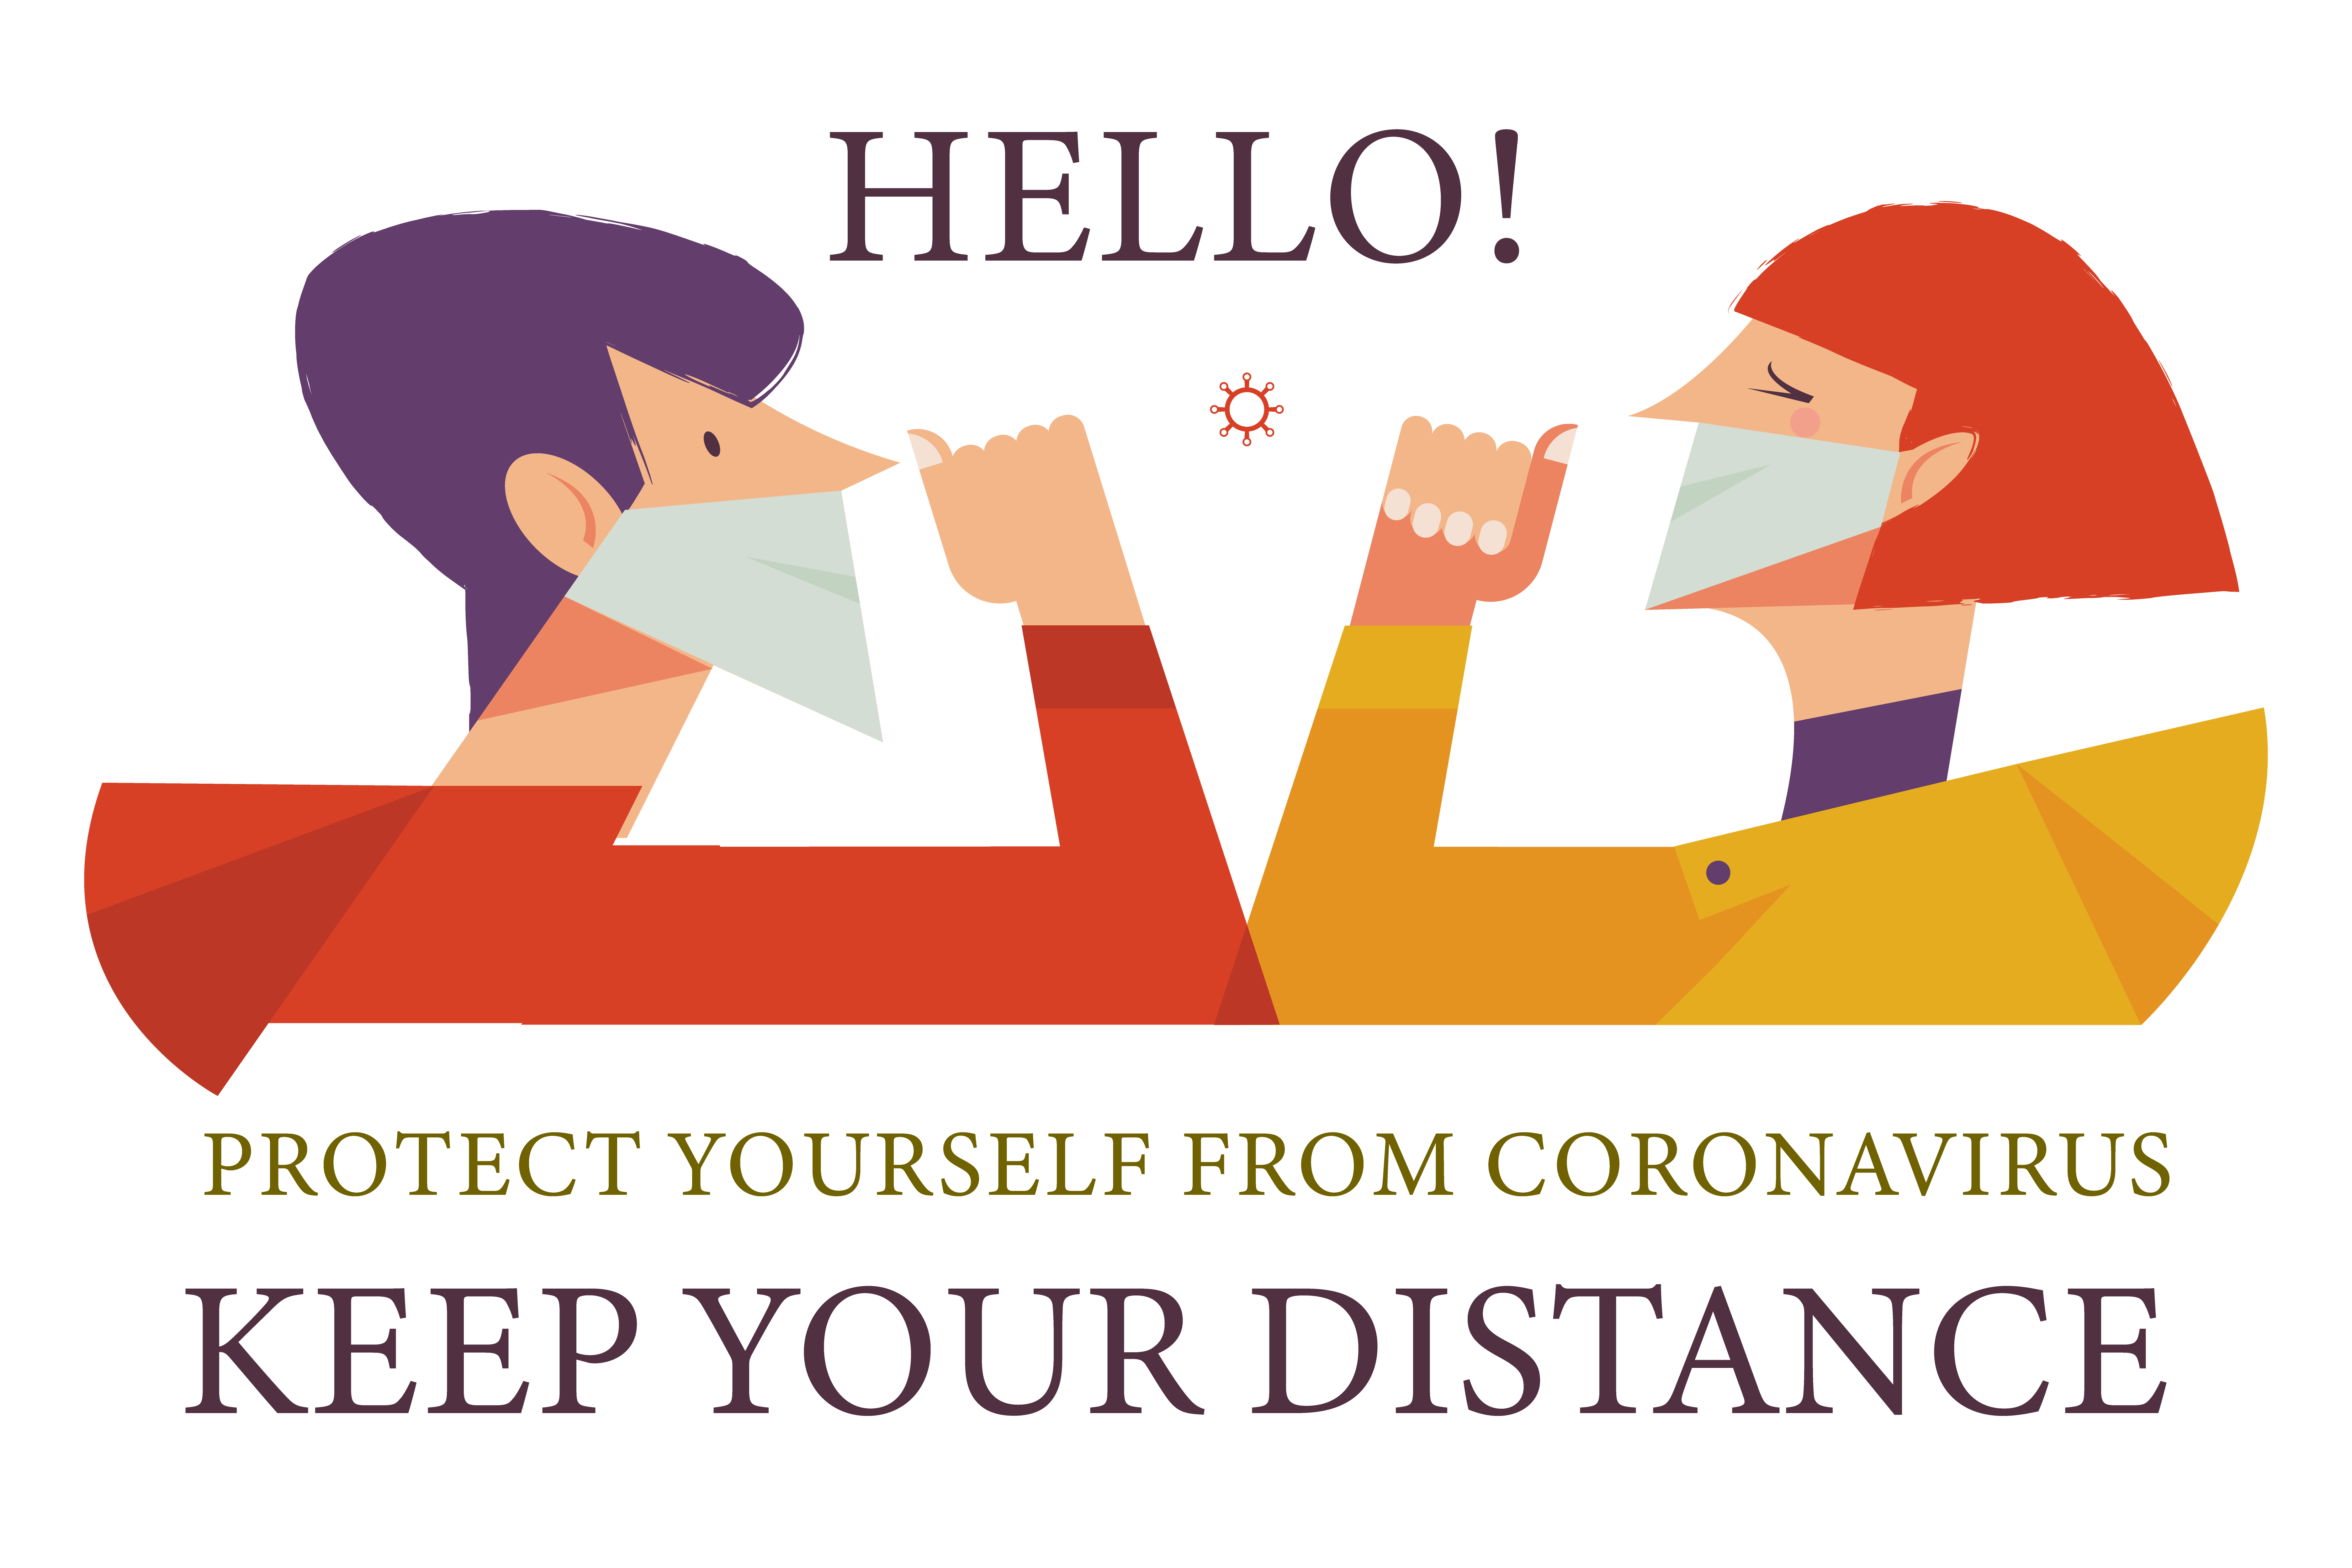 Keep your distance. Vector poster encouraging people to wear masks and keep a social distance during the coronavirus pandemic. Hello. New contactless greeting without shaking hands.. Keep your distance. Vector poster encouraging people to wear masks and keep a social distance during the coronavirus pandemic